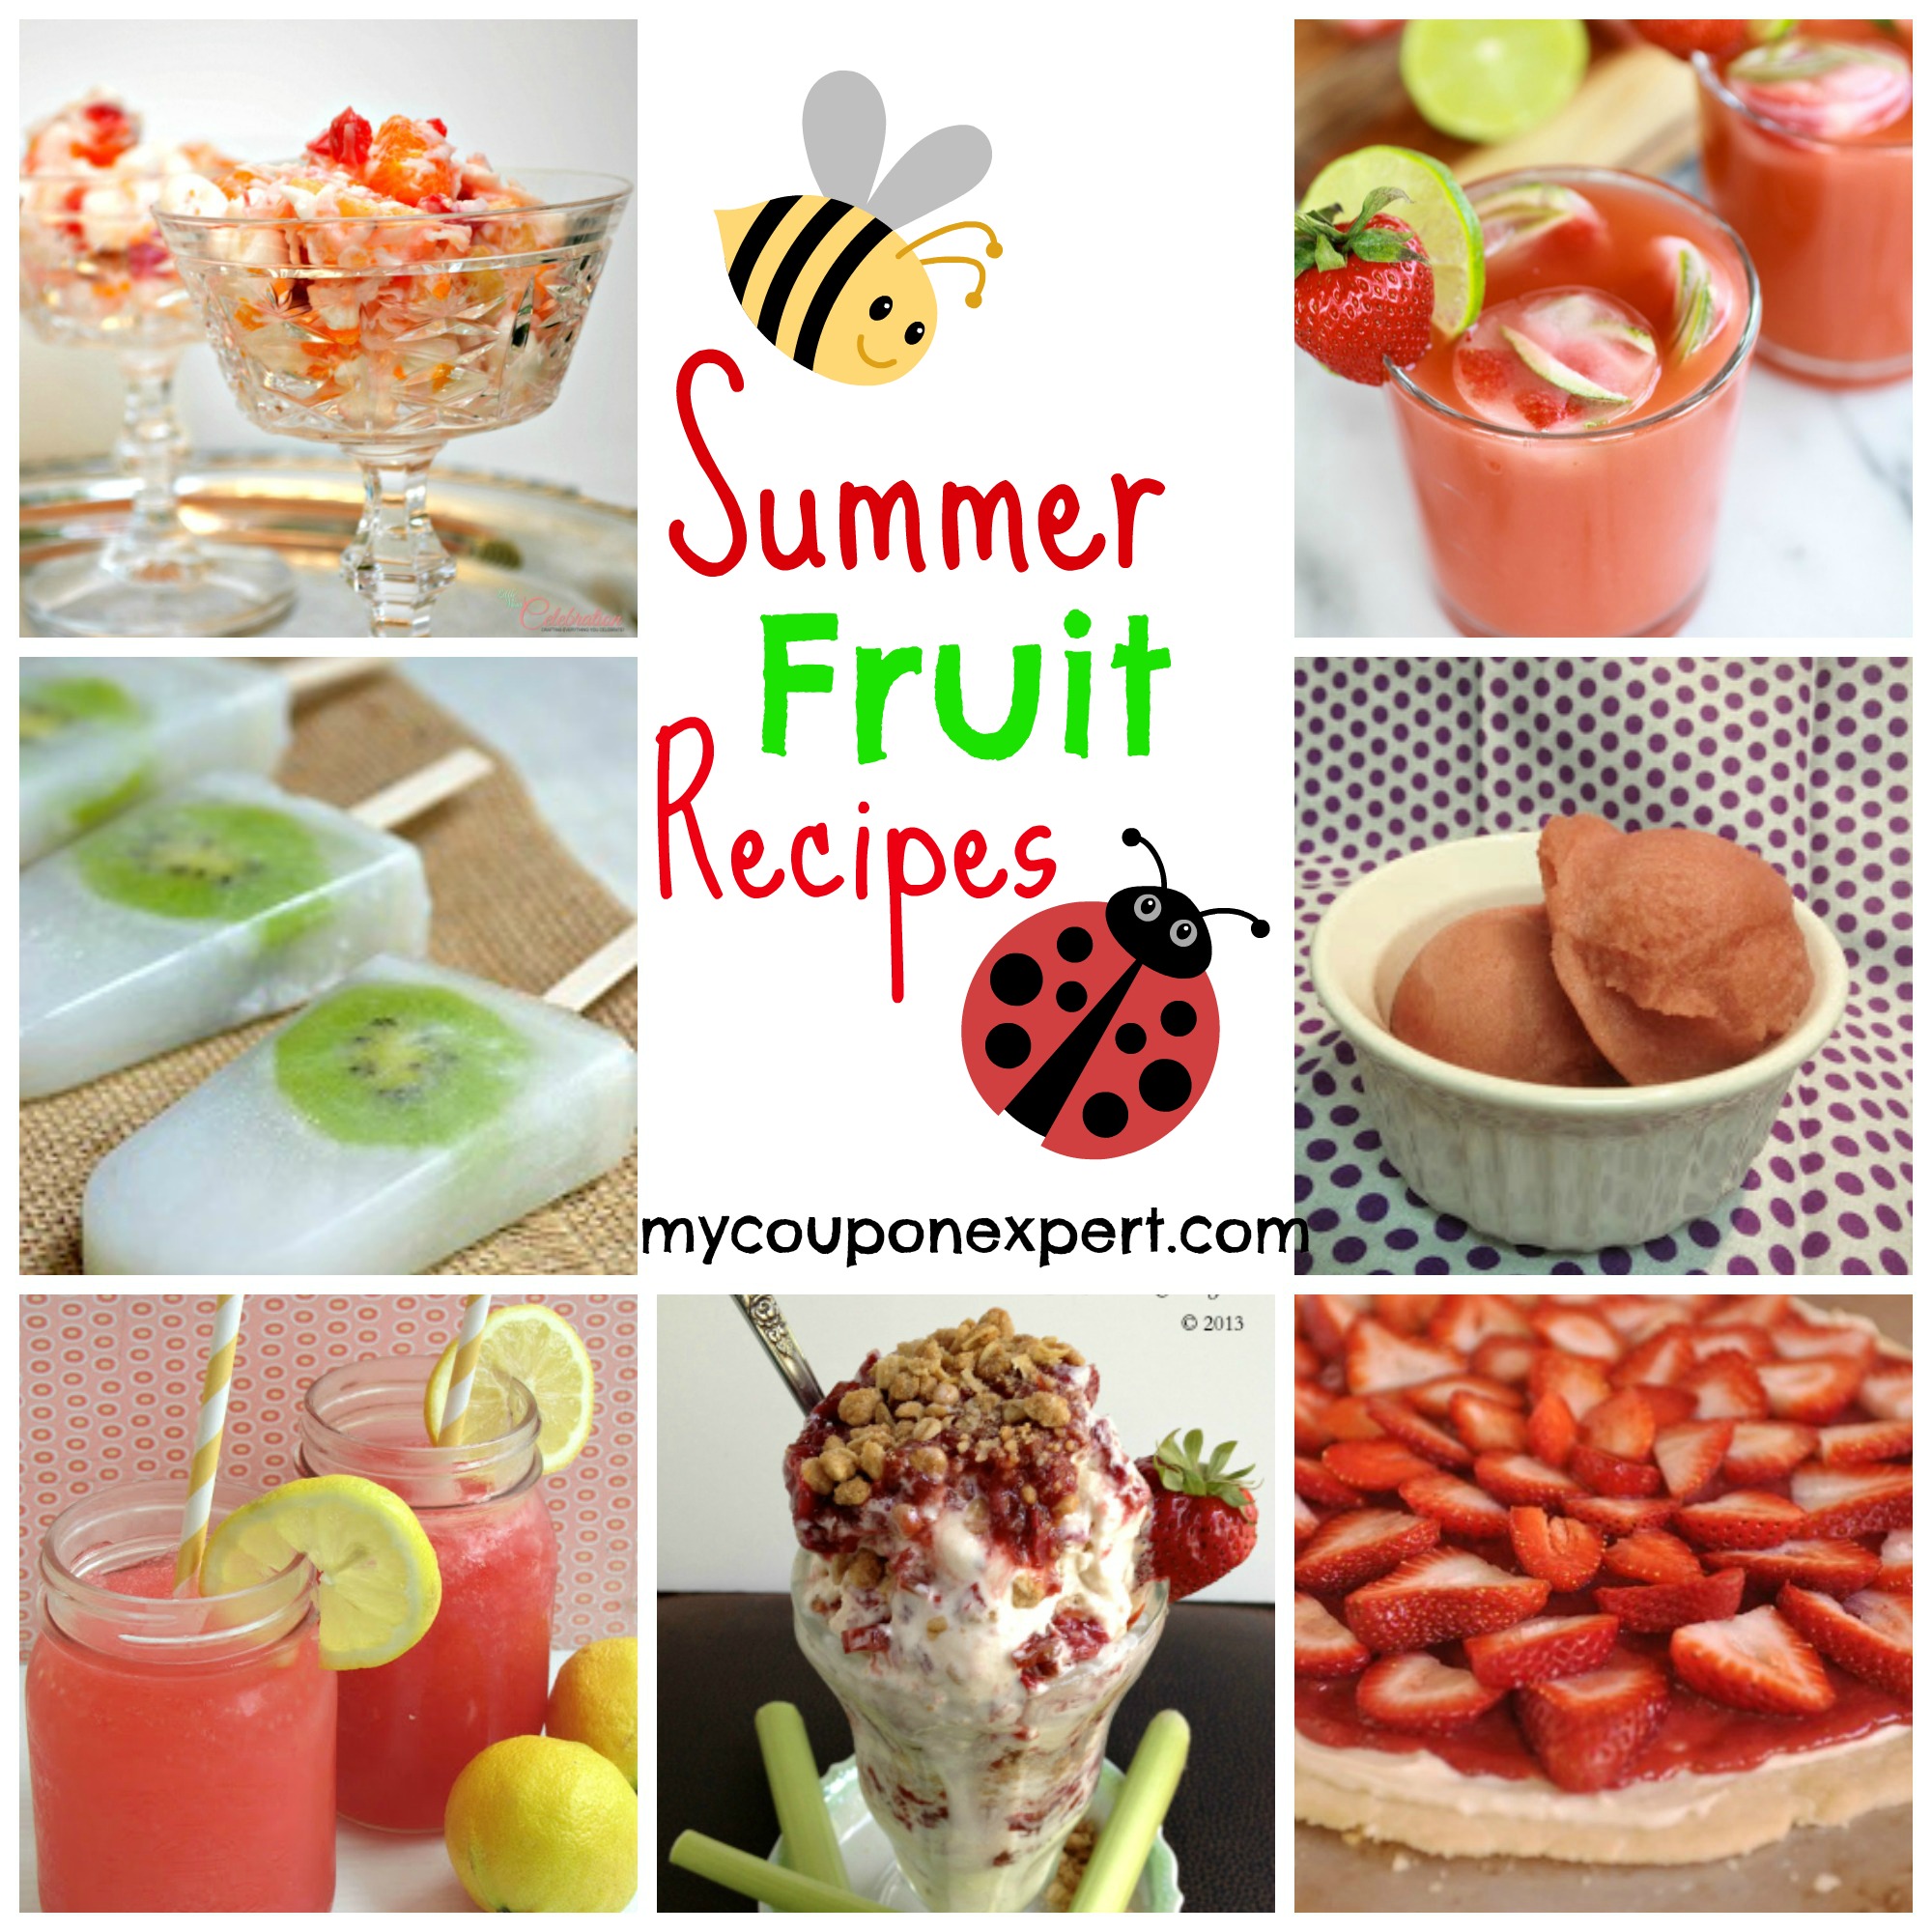 Summer Fruit Recipes!  Make good use of those Sweetbay Coupons!!